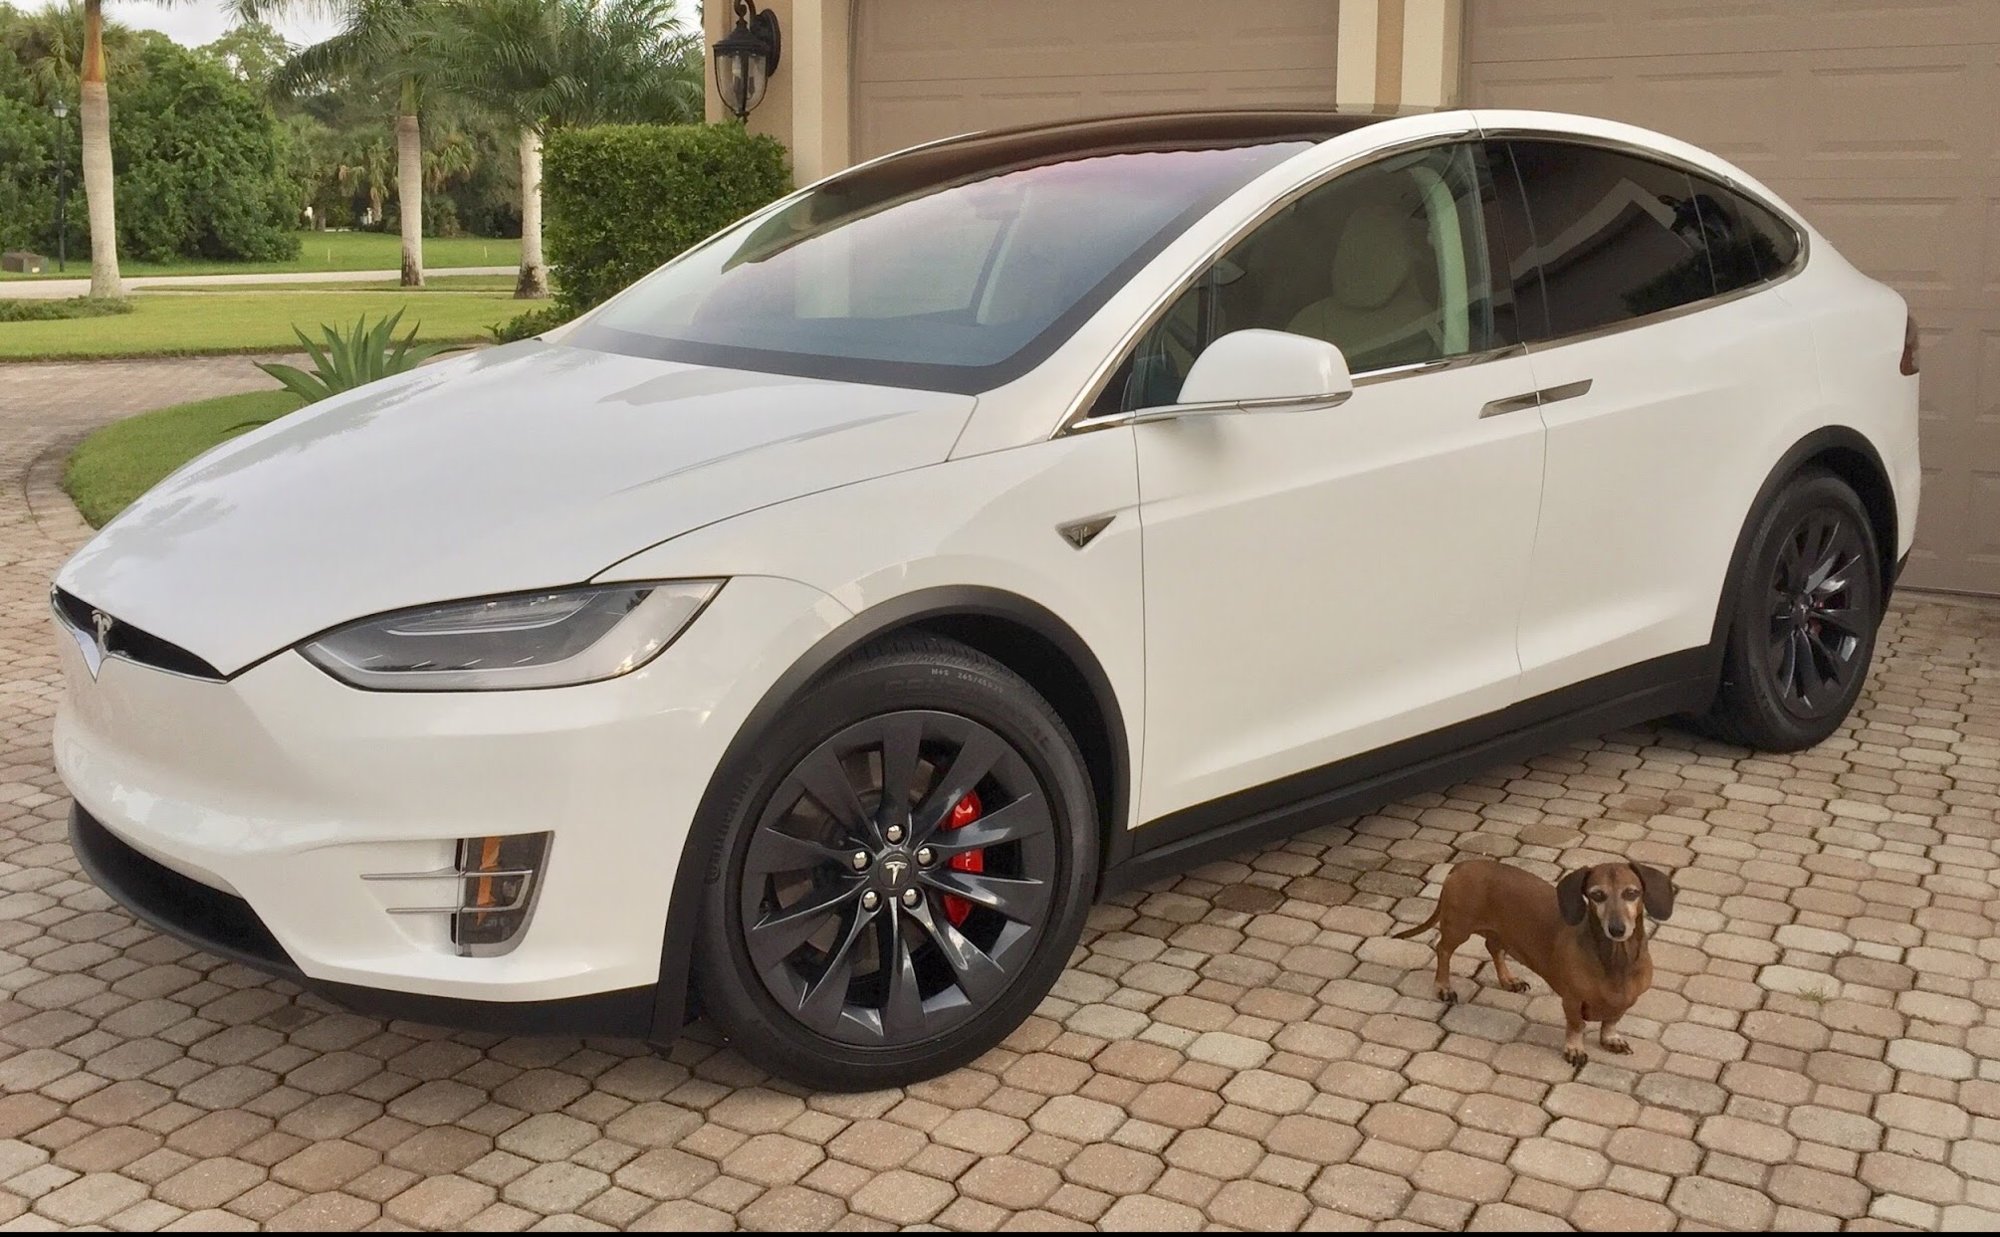 Pros and Cons for 22 inch Wheels Vs 20 inch Wheels | Tesla Motors Club